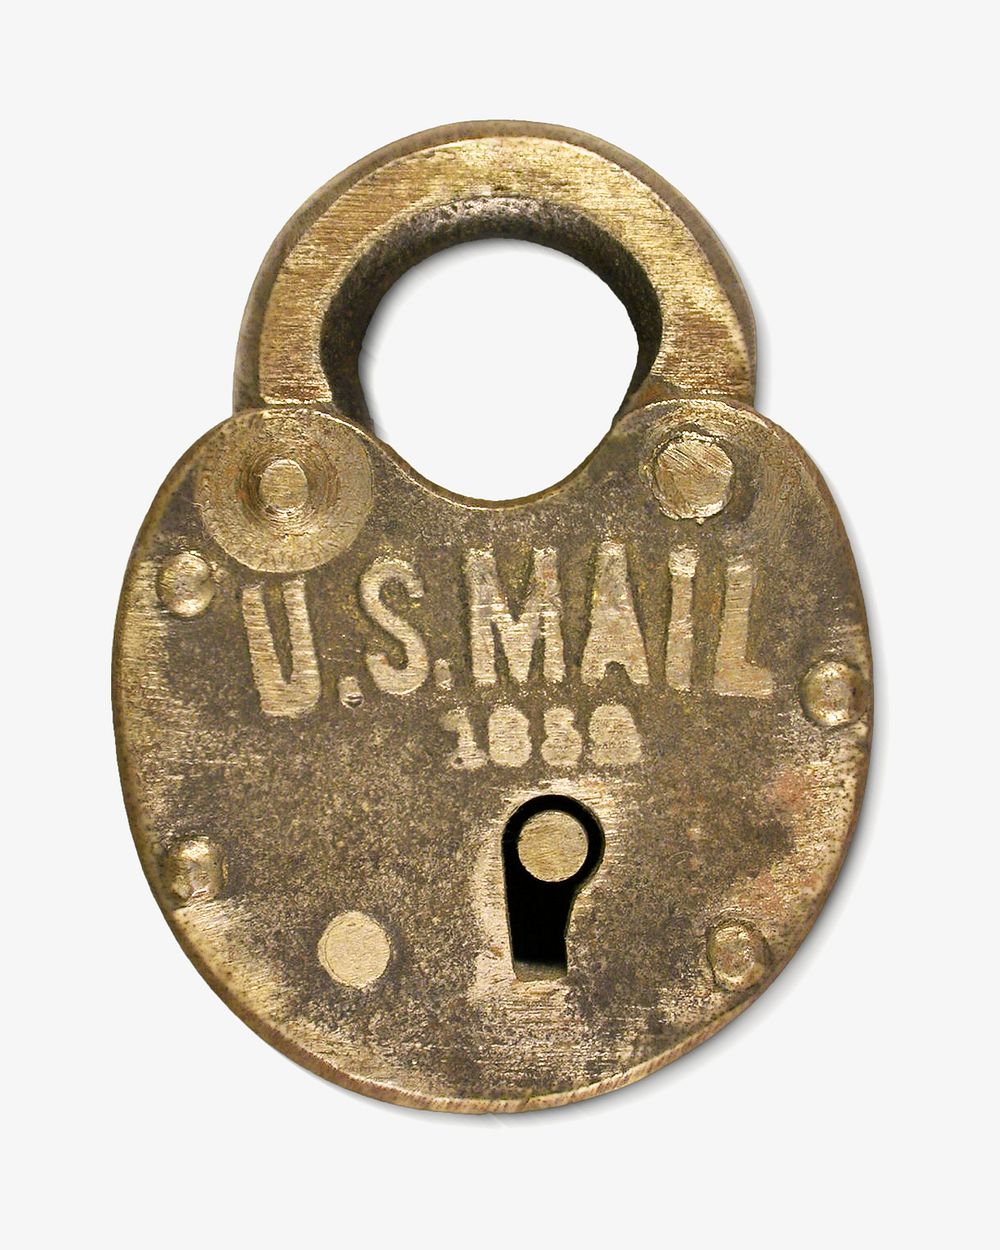 Lever pouch padlock, iron lock developed by H. C. Jones. Original public domain image from The Smithsonian Institution.…